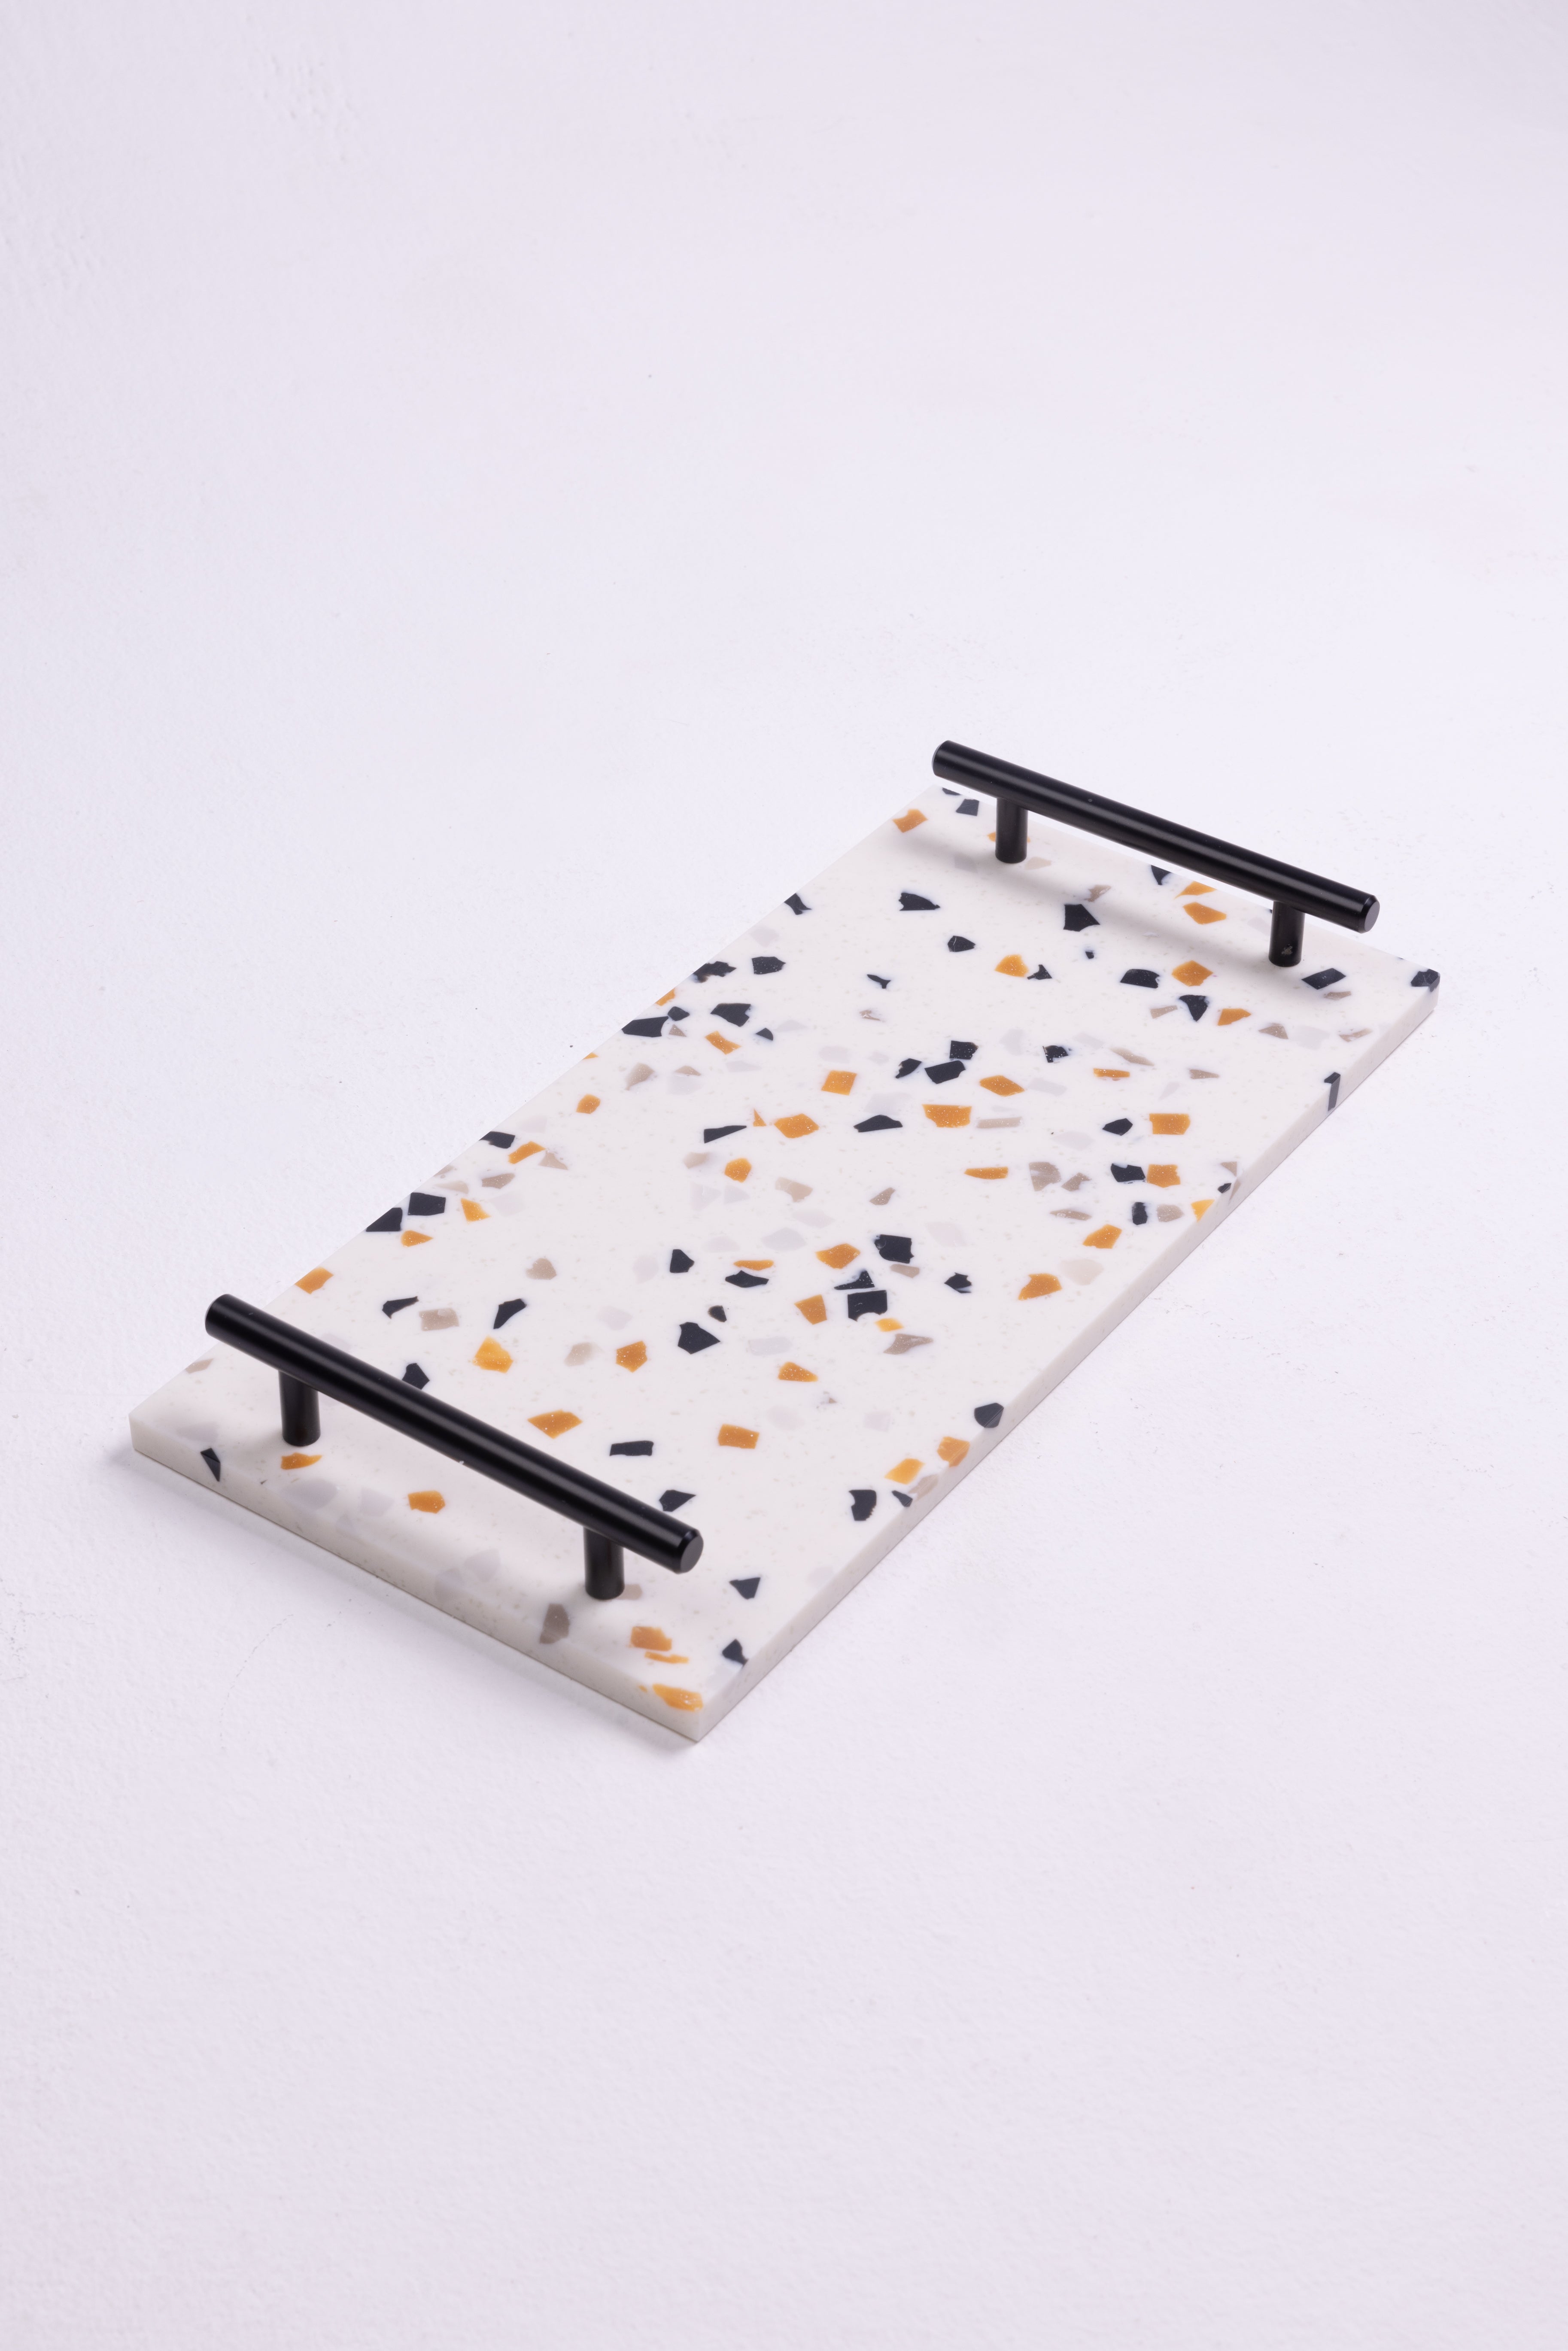 A coffee tray made from Corain material in terrazzo style